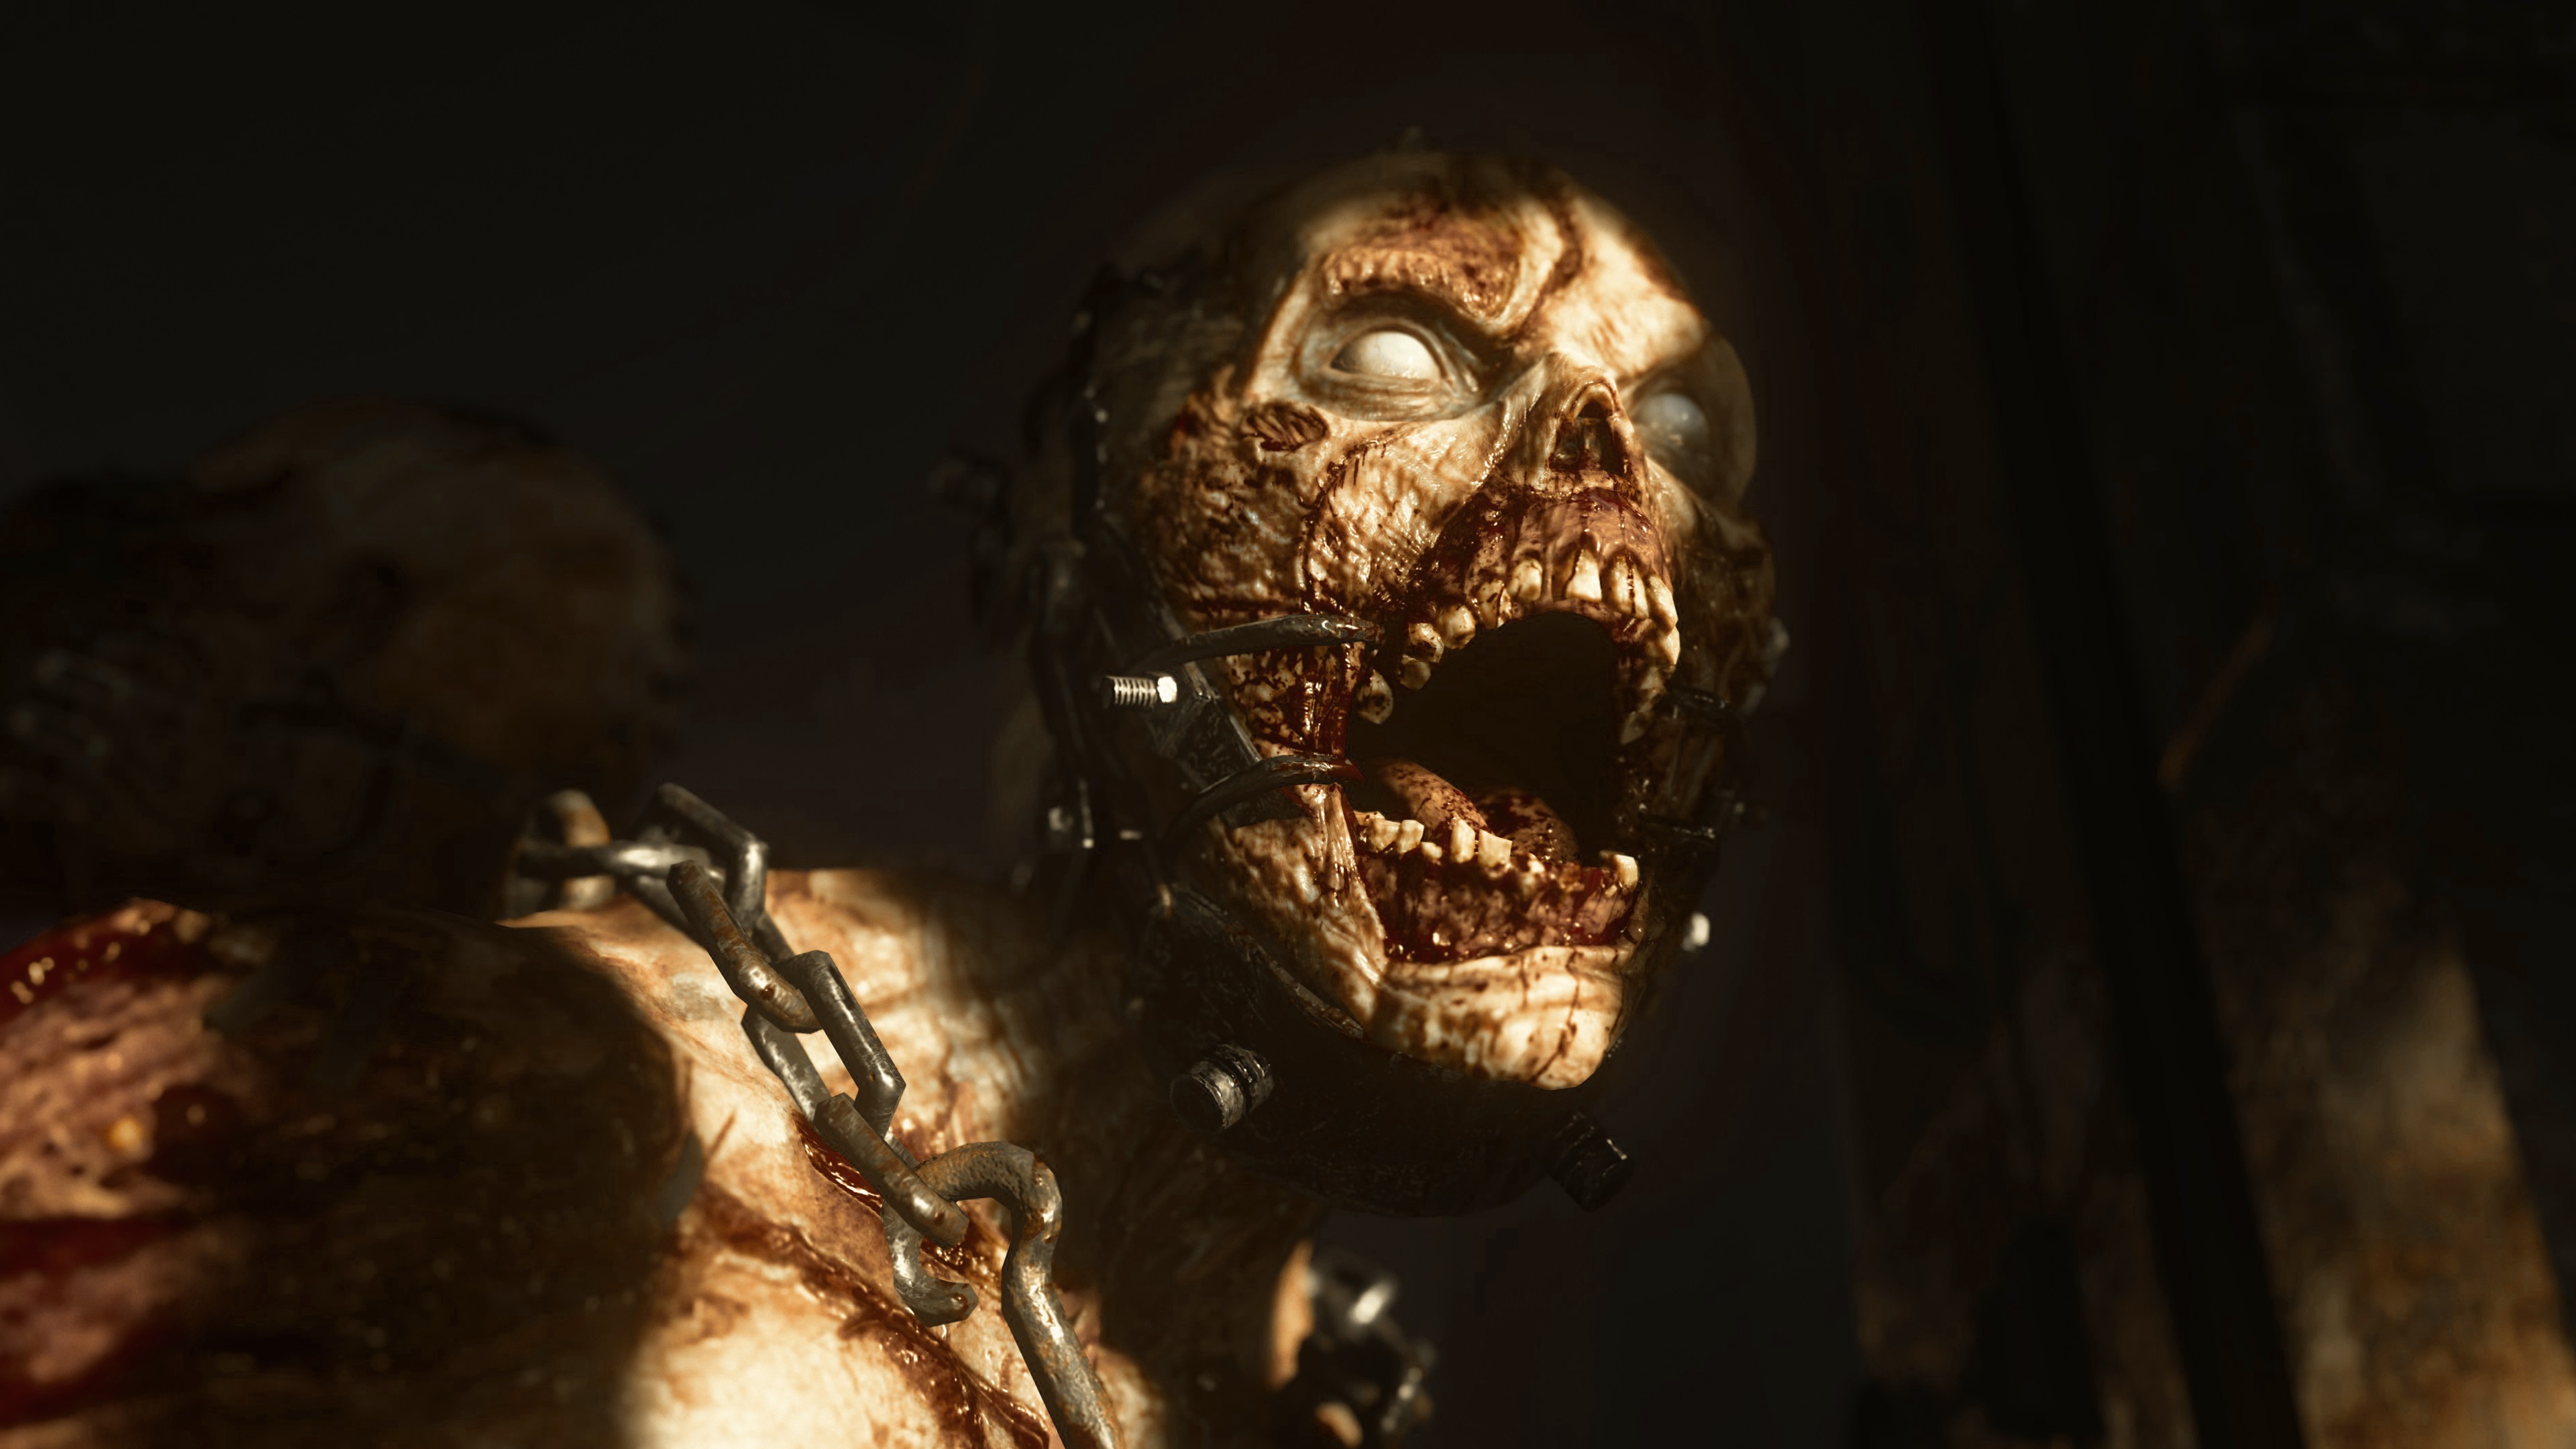 Call of Duty: Vanguard Zombies will be a prologue of the Black Ops Cold  War zombie story